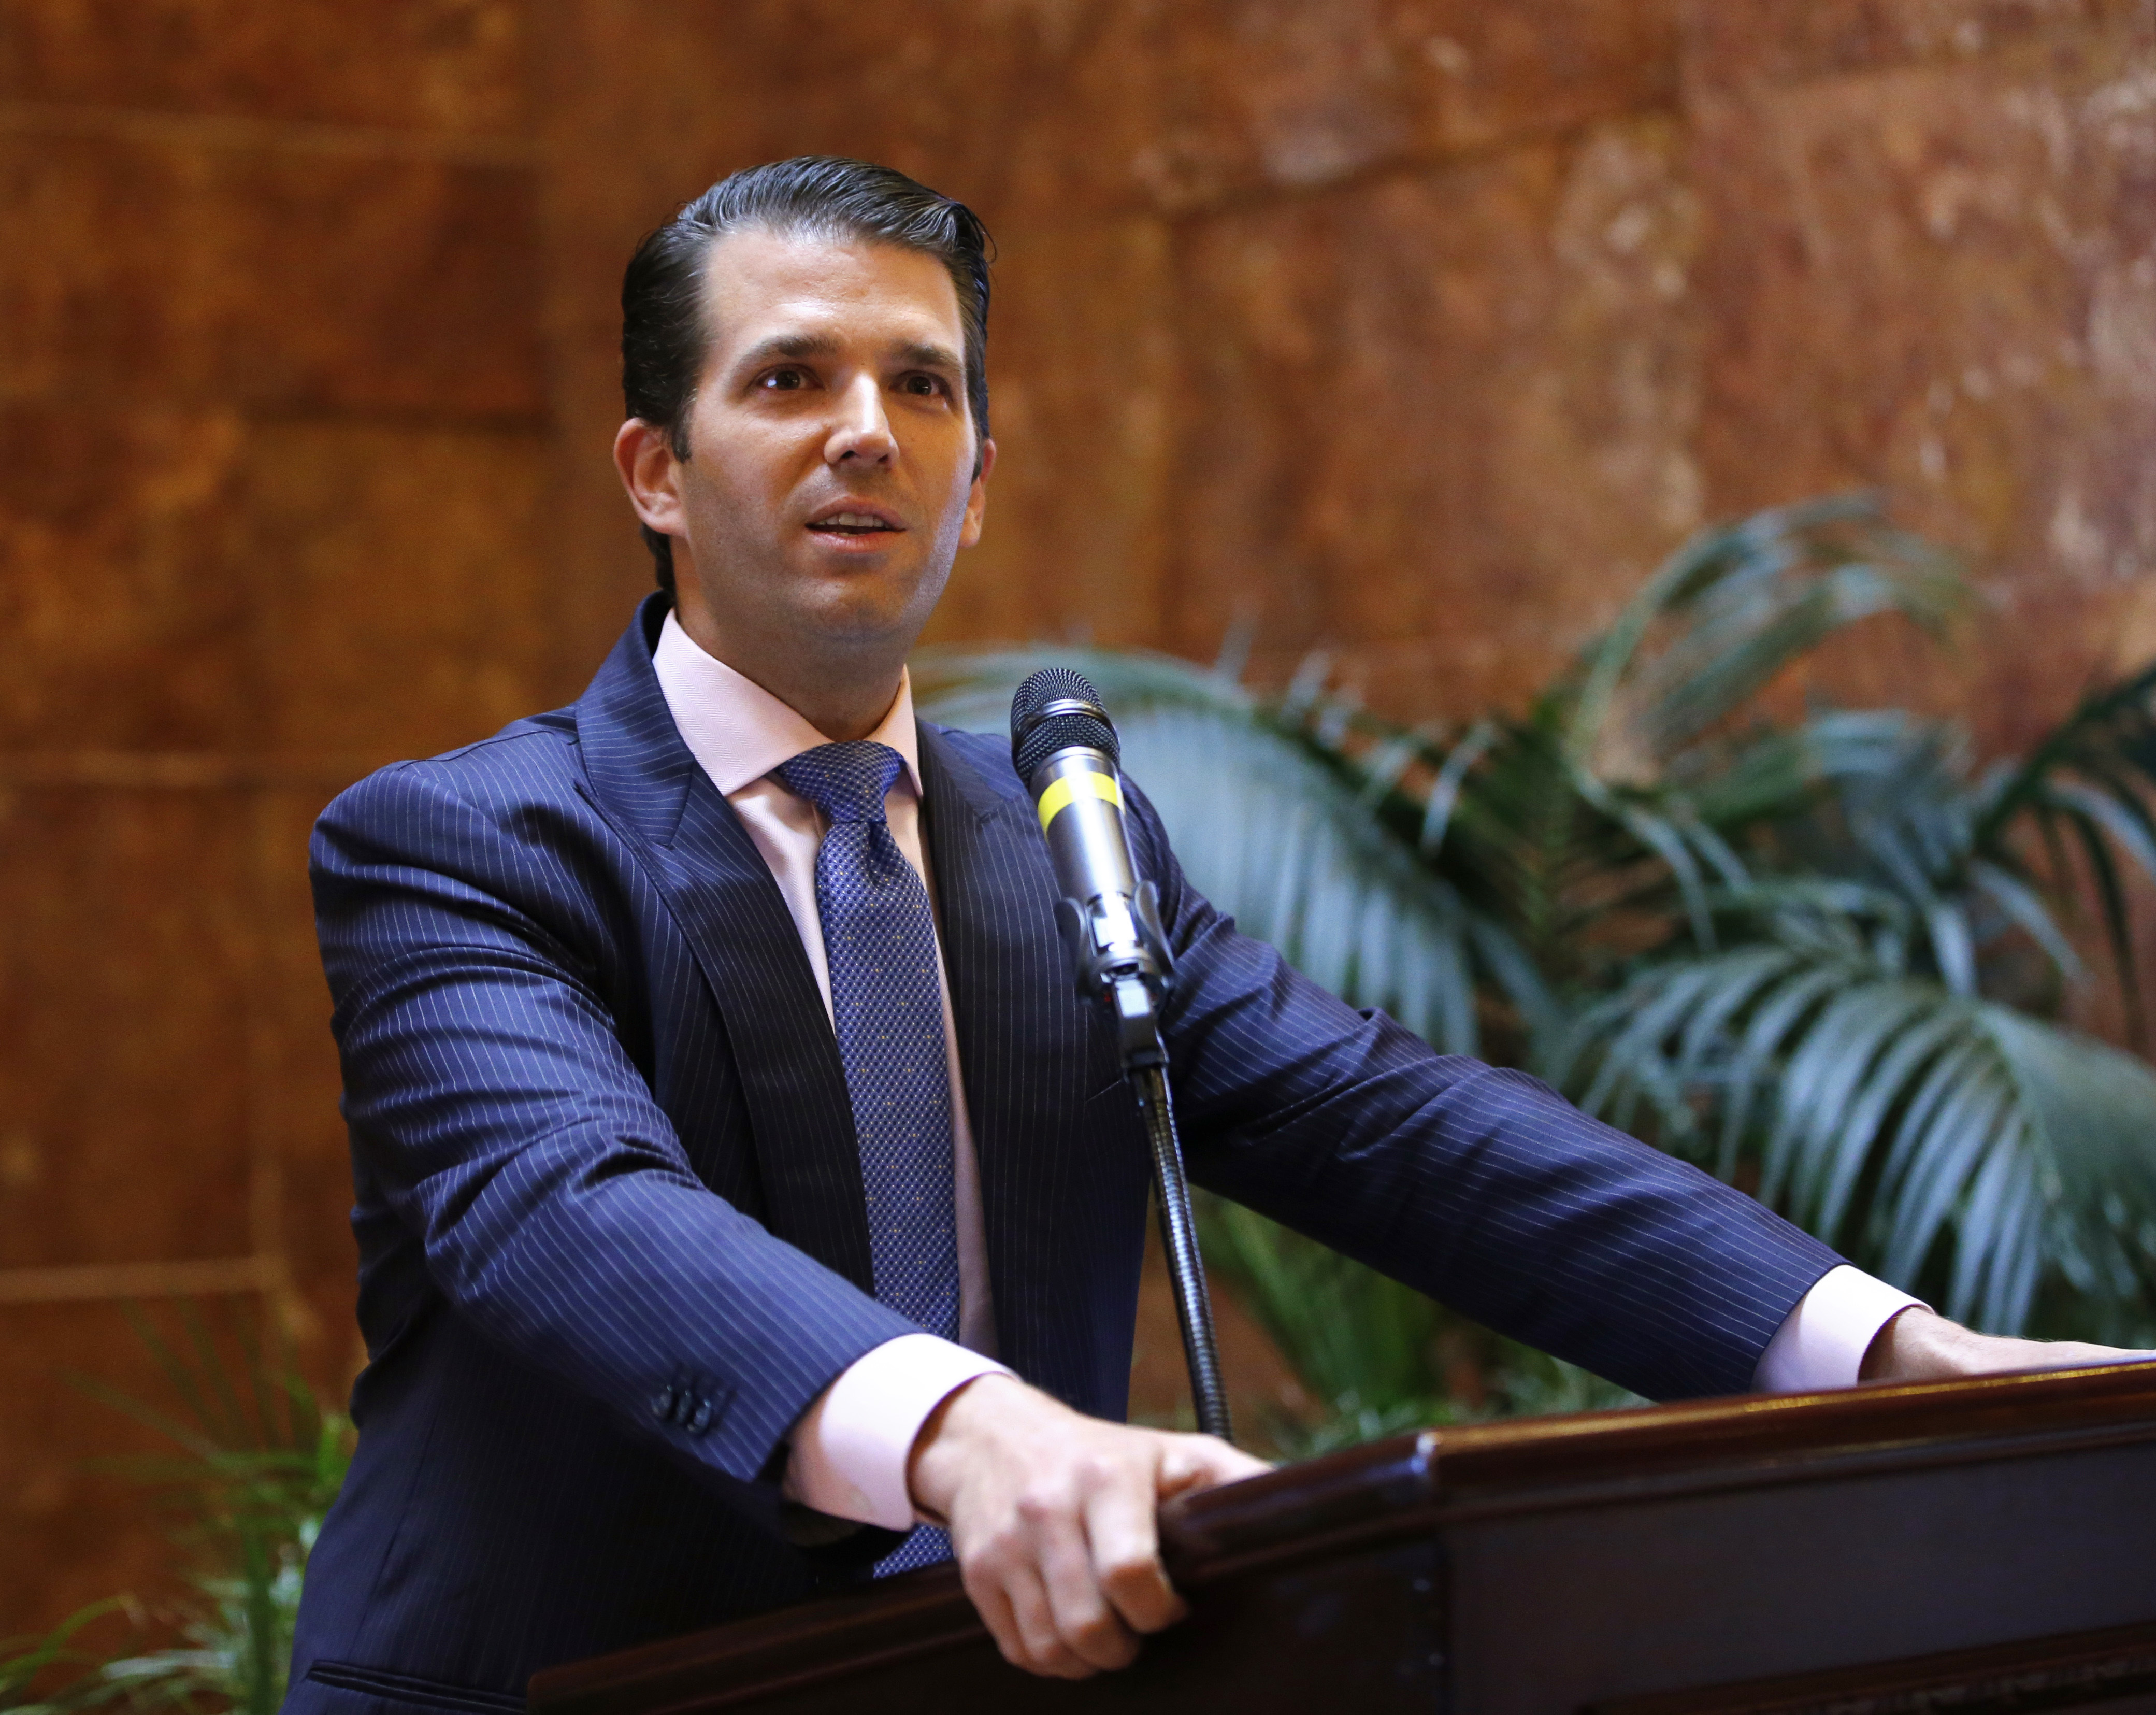 Donald Trump Jr., executive vice president of The Trump Organization, discusses the expansion of Trump hotels, Monday, June 5, 2017, in New York.  The Trump Organization is launching a new mid-market hotel chain called "American Ideas." The president's son said the new chain will start with three hotels in Mississippi. The president's son says inspiration for the chain came from traveling through America during his father's presidential campaign. The company also says the first of dozens of hotels in another new Trump chain called Scion is under construction in Mississippi, too. (AP Photo/Kathy Willens)